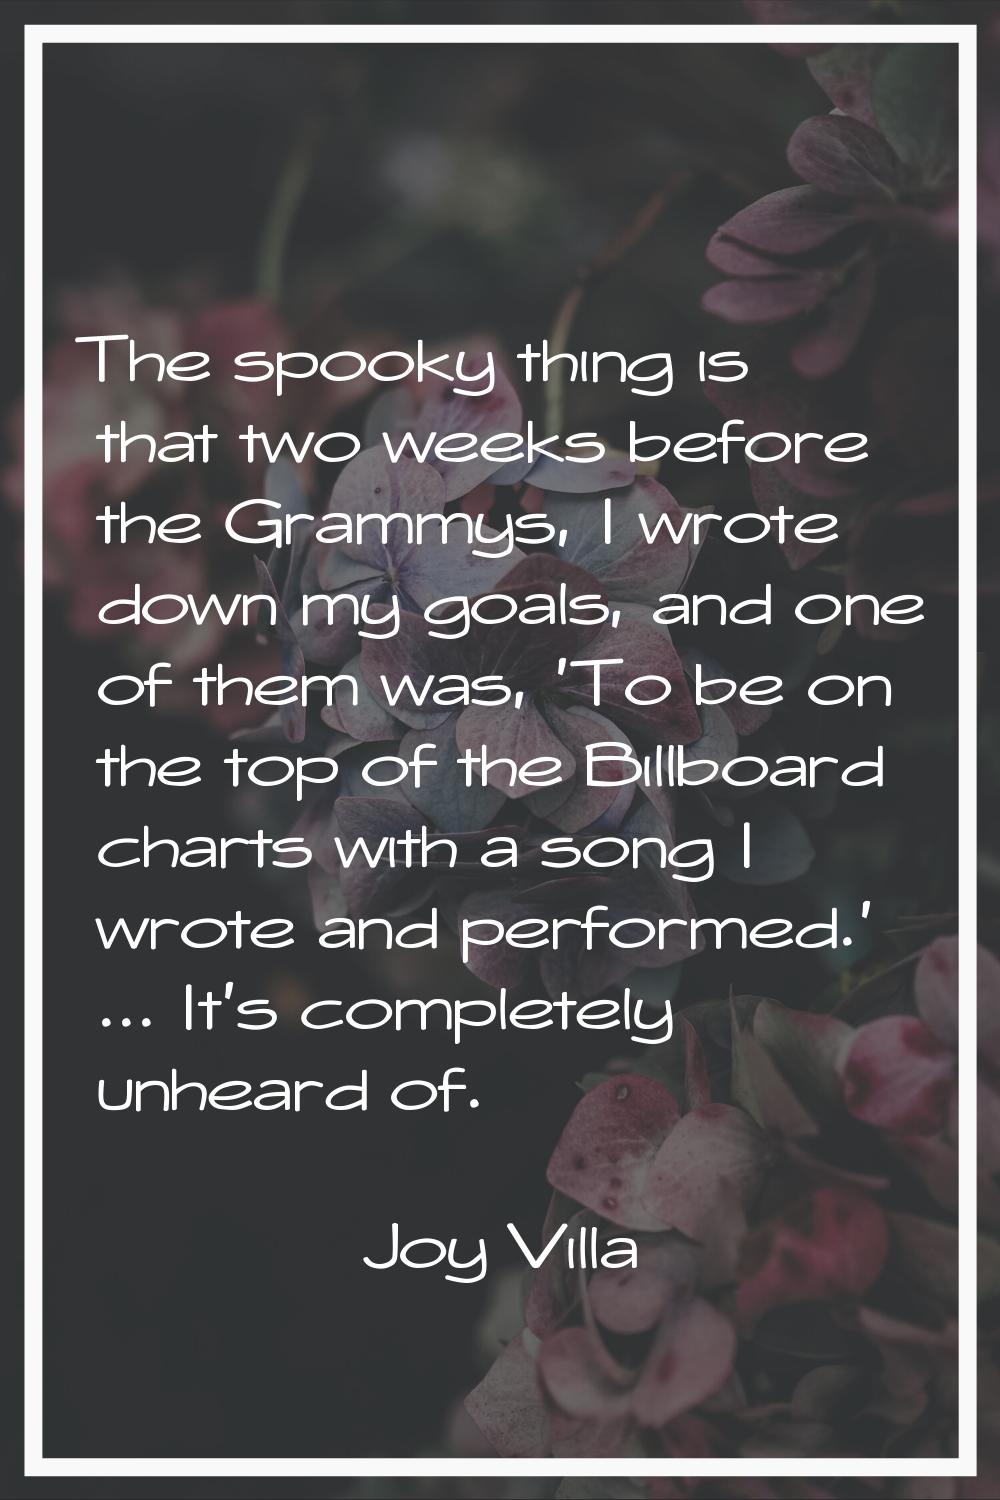 The spooky thing is that two weeks before the Grammys, I wrote down my goals, and one of them was, 